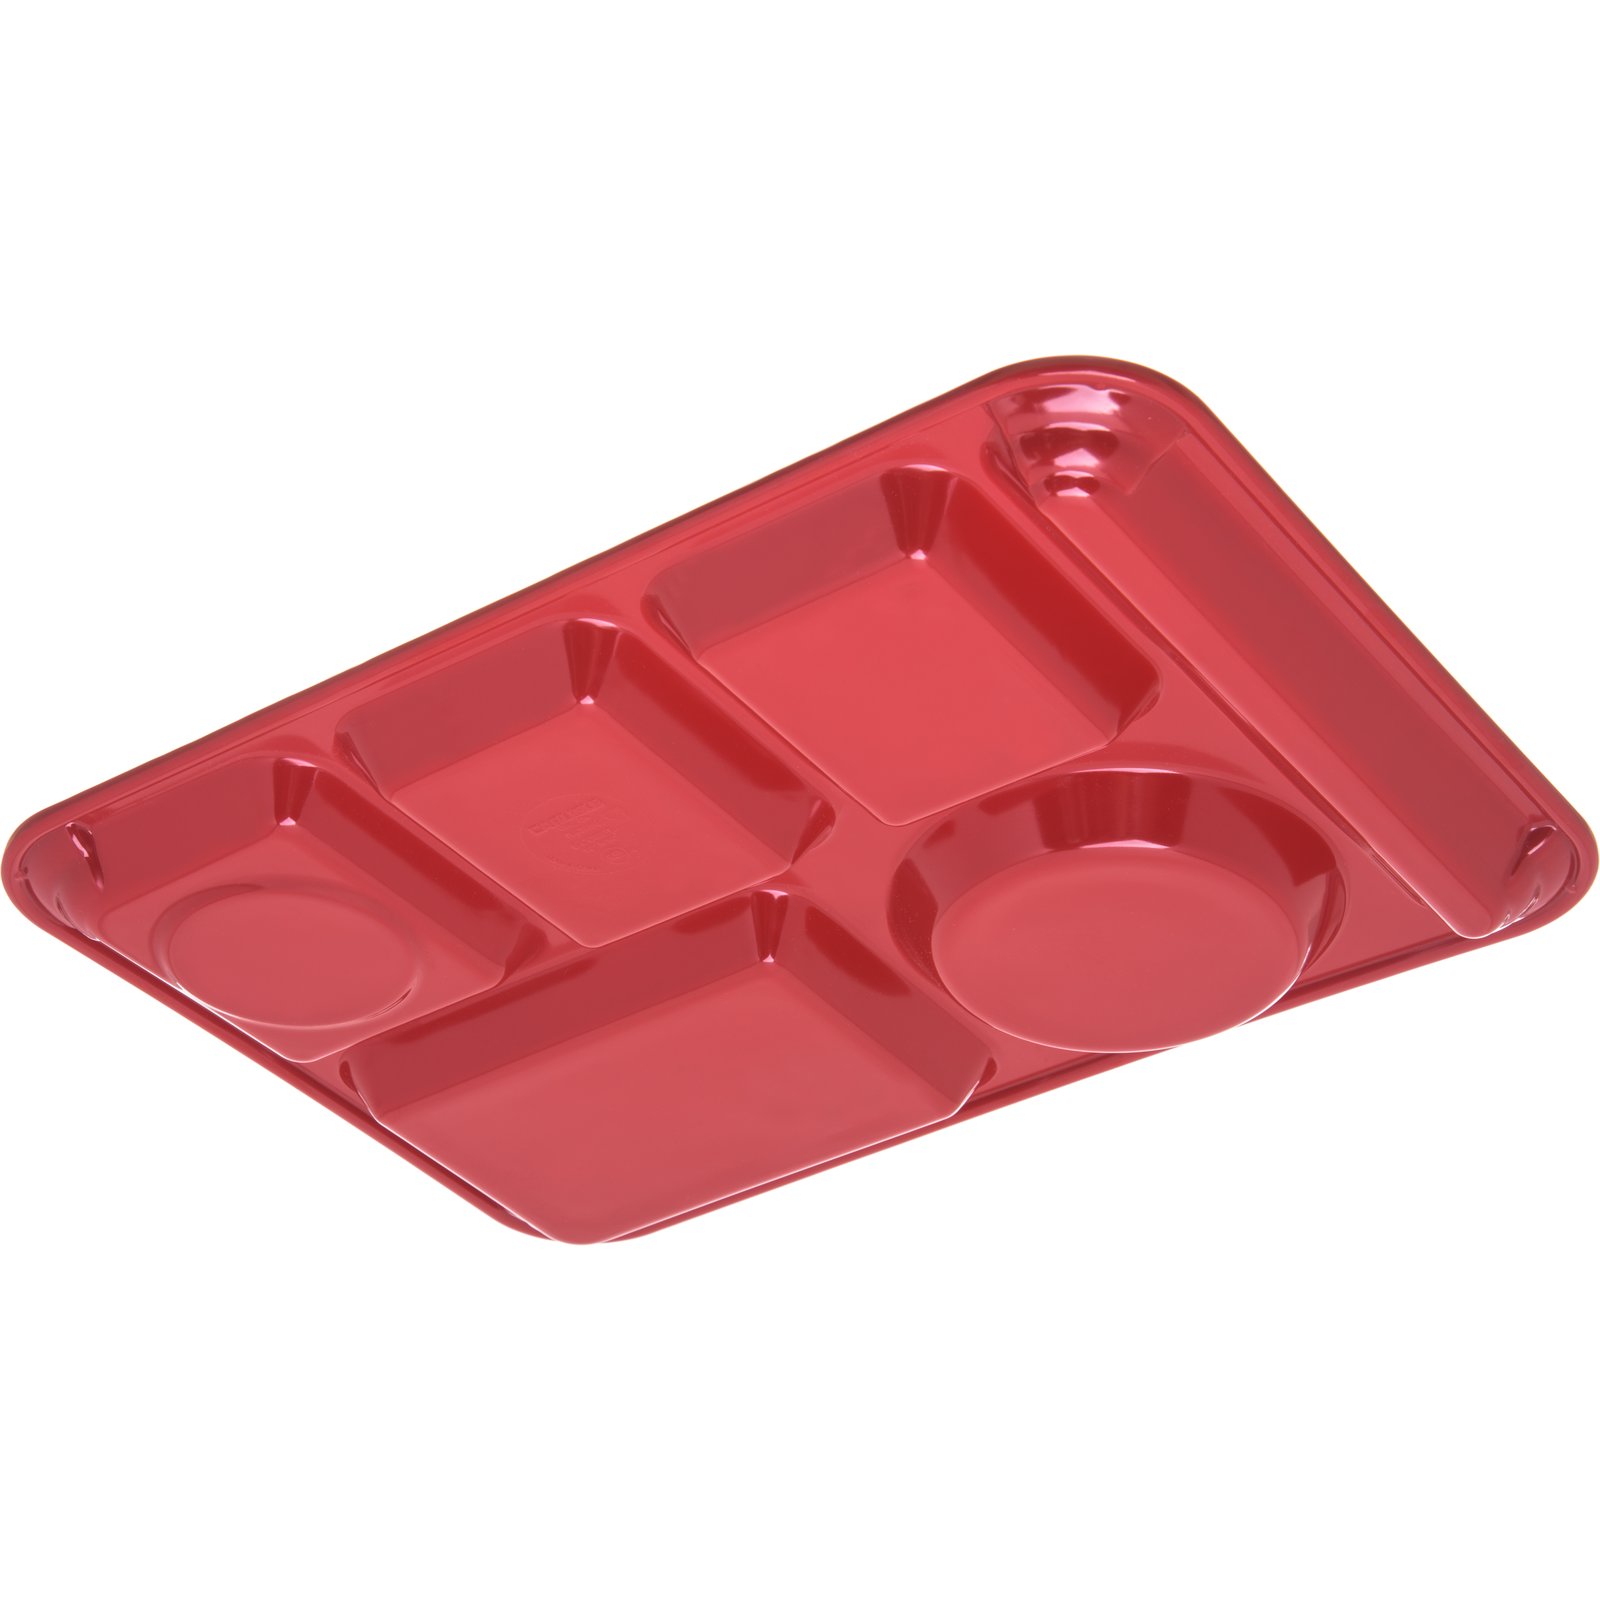 4398005 - Left-Hand Heavyweight 6-Compartment Melamine Tray 10 x 14 - Red